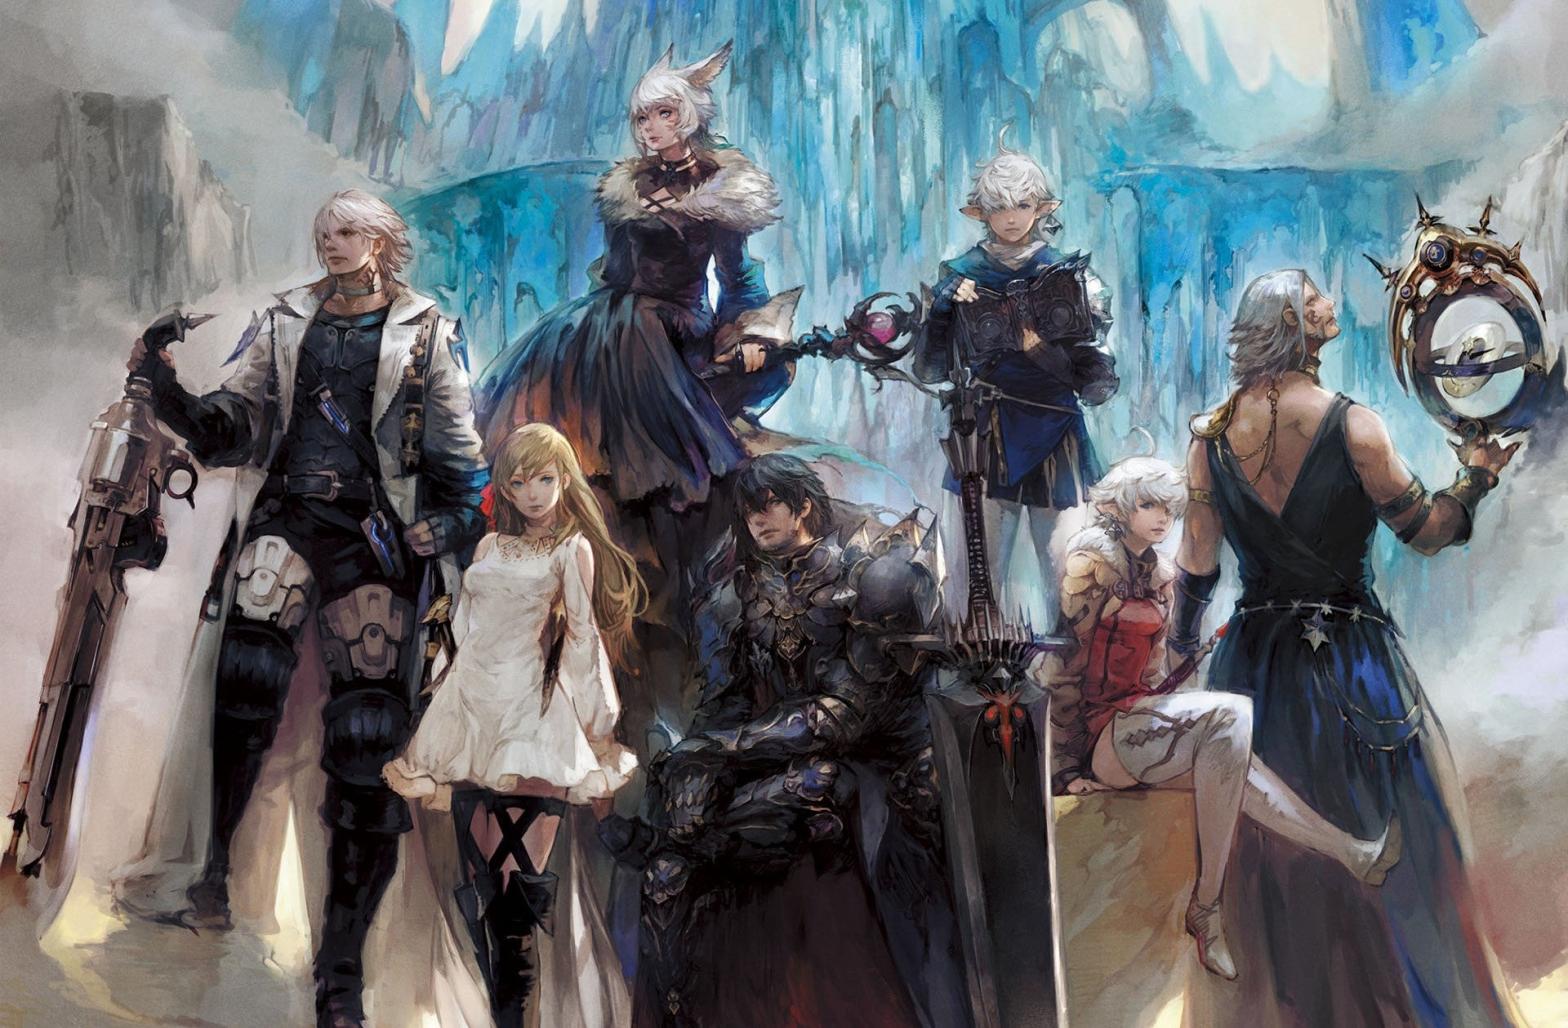 A Final Fantasy XIV Beginner’s Guide For Xbox